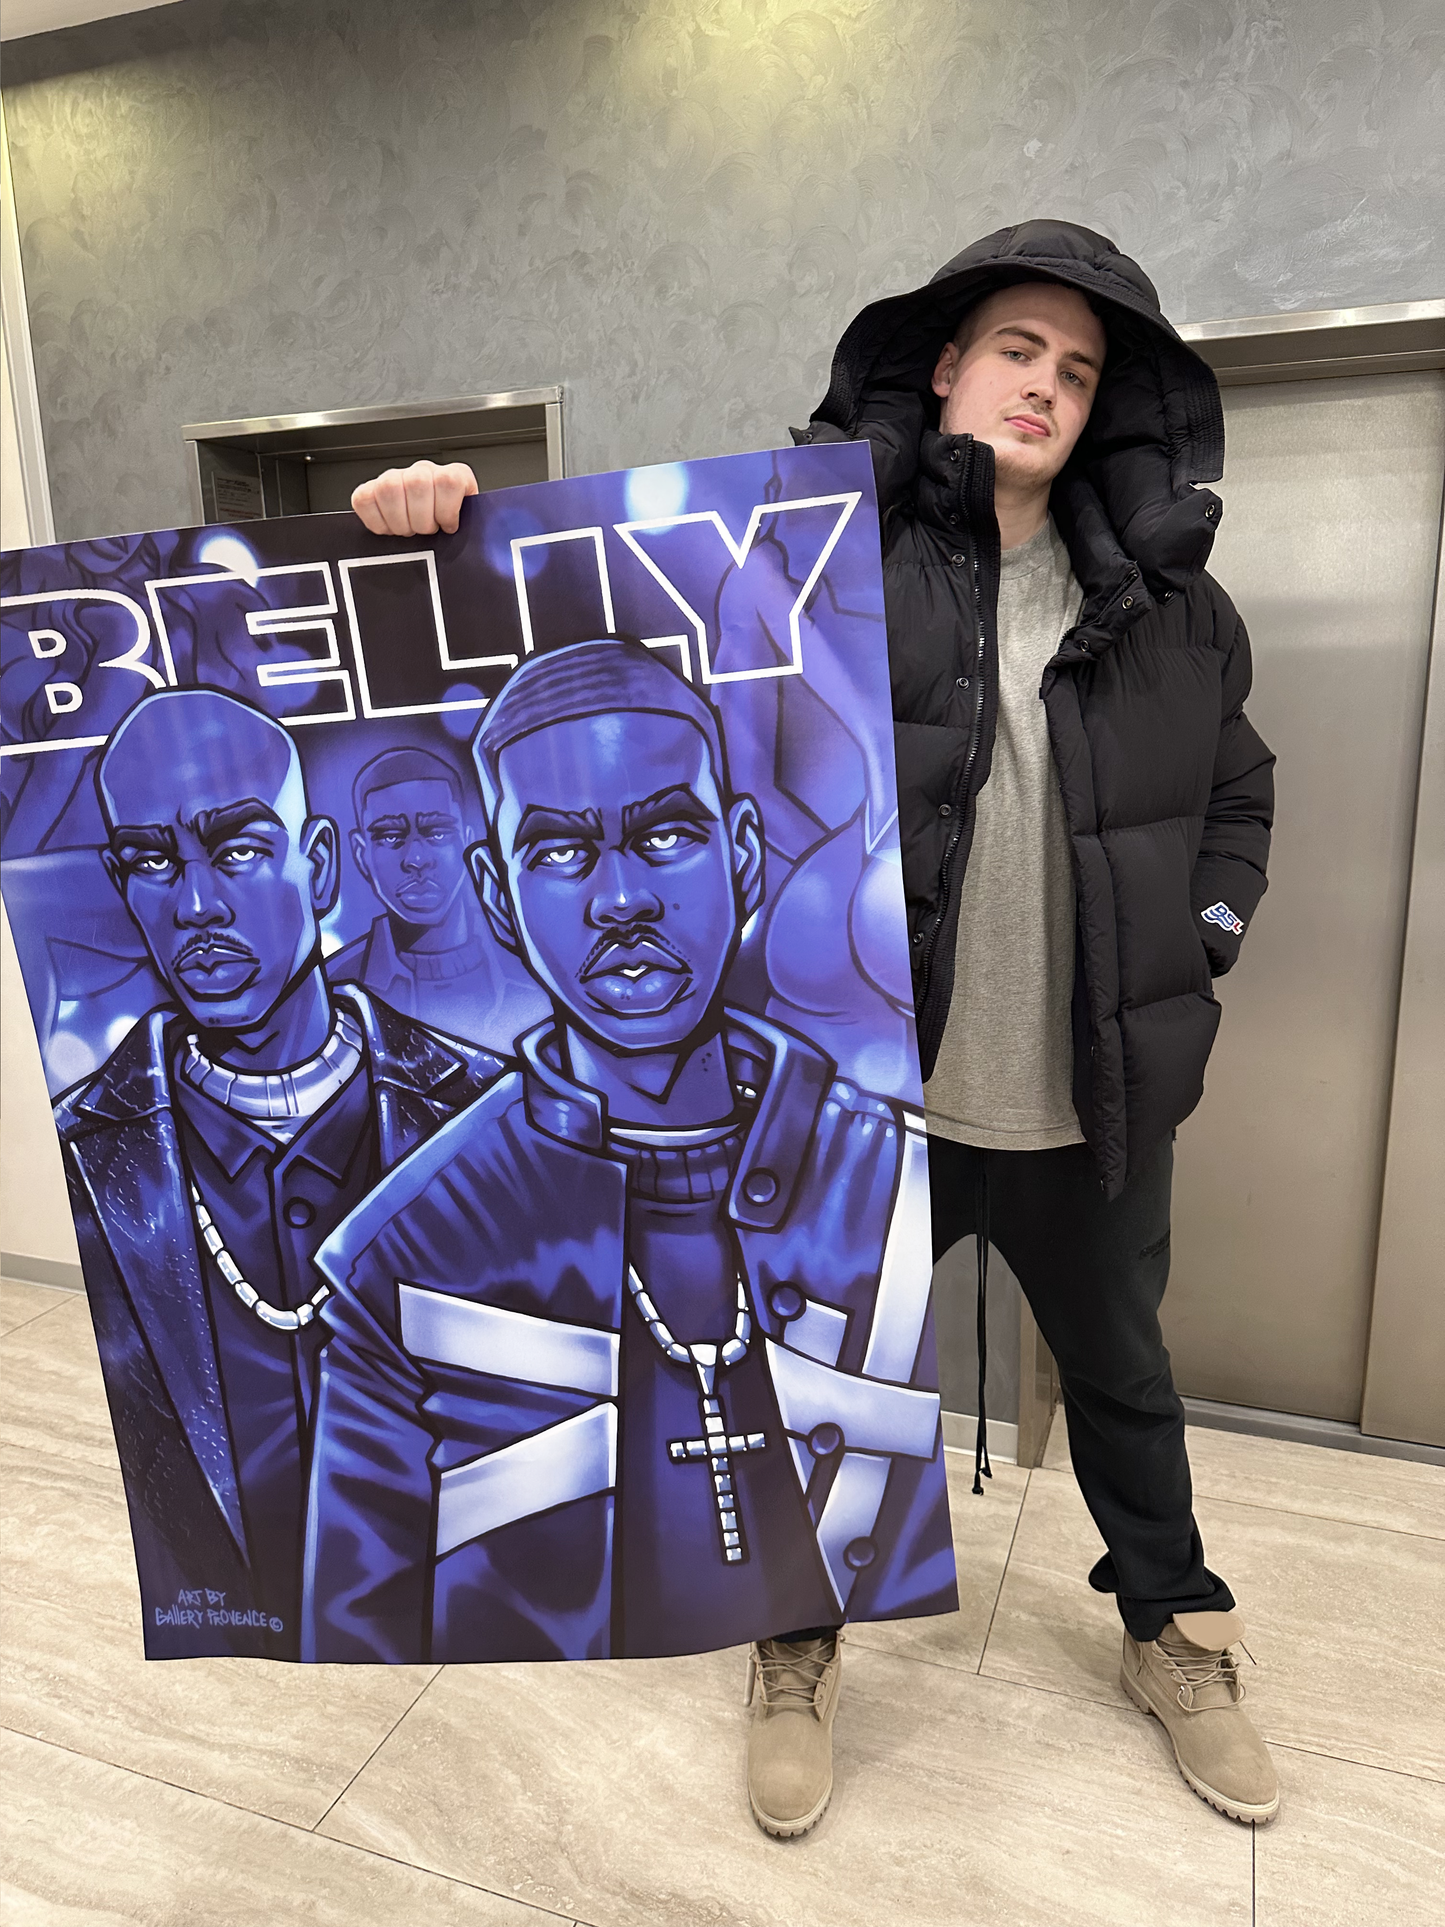 BELLY 25th anniversary big posters by GP